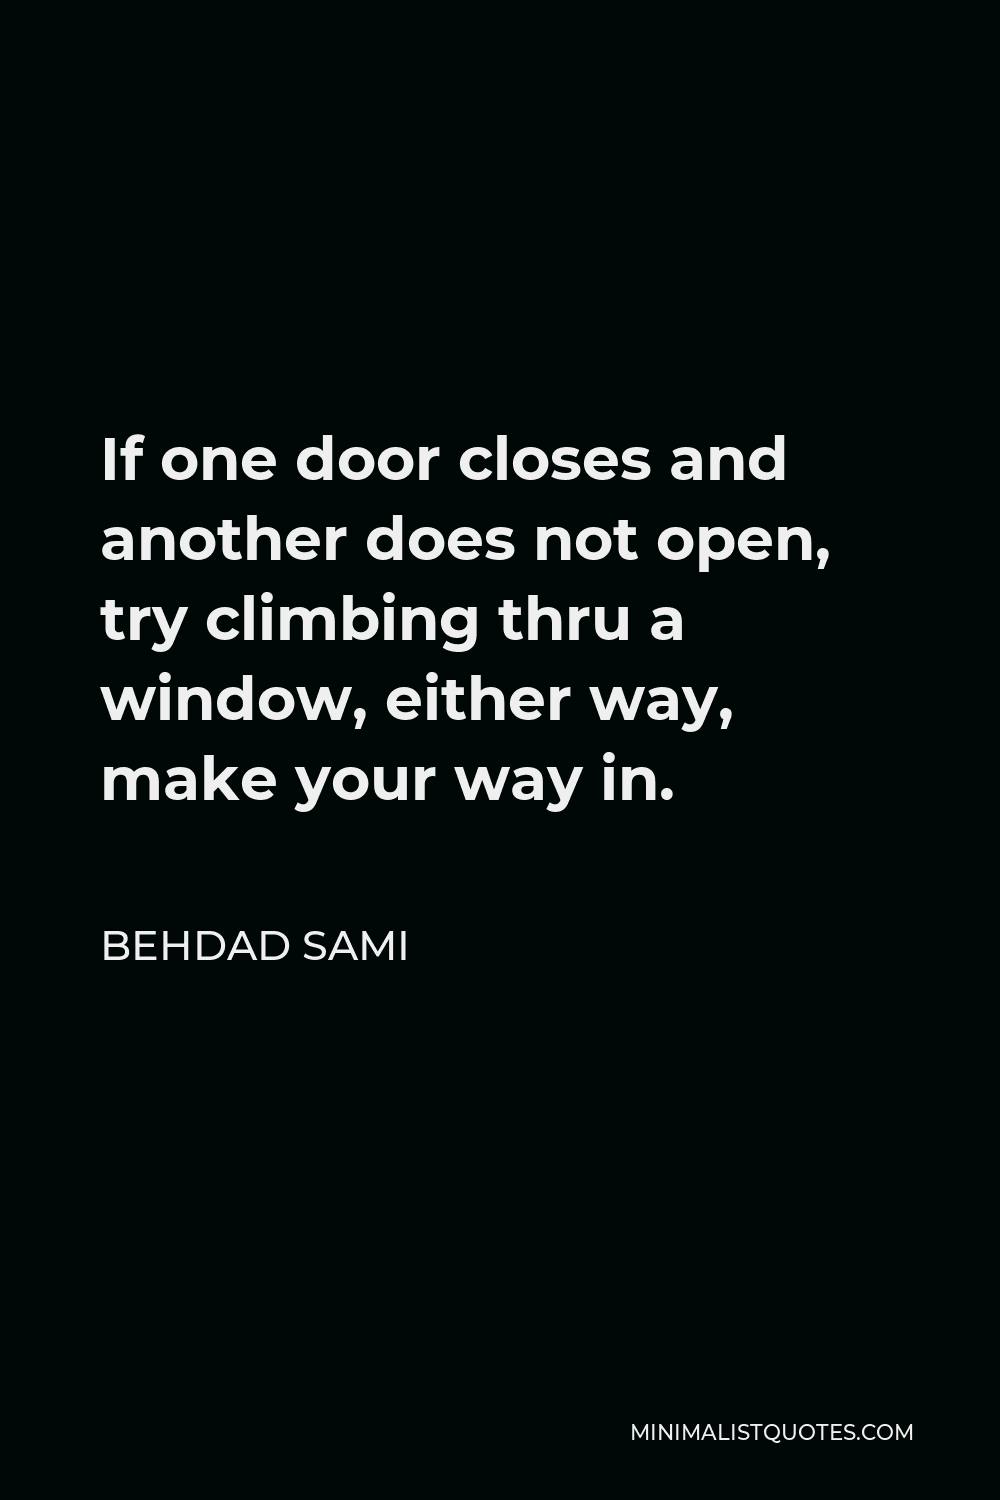 Behdad Sami Quote - If one door closes and another does not open, try climbing thru a window, either way, make your way in.